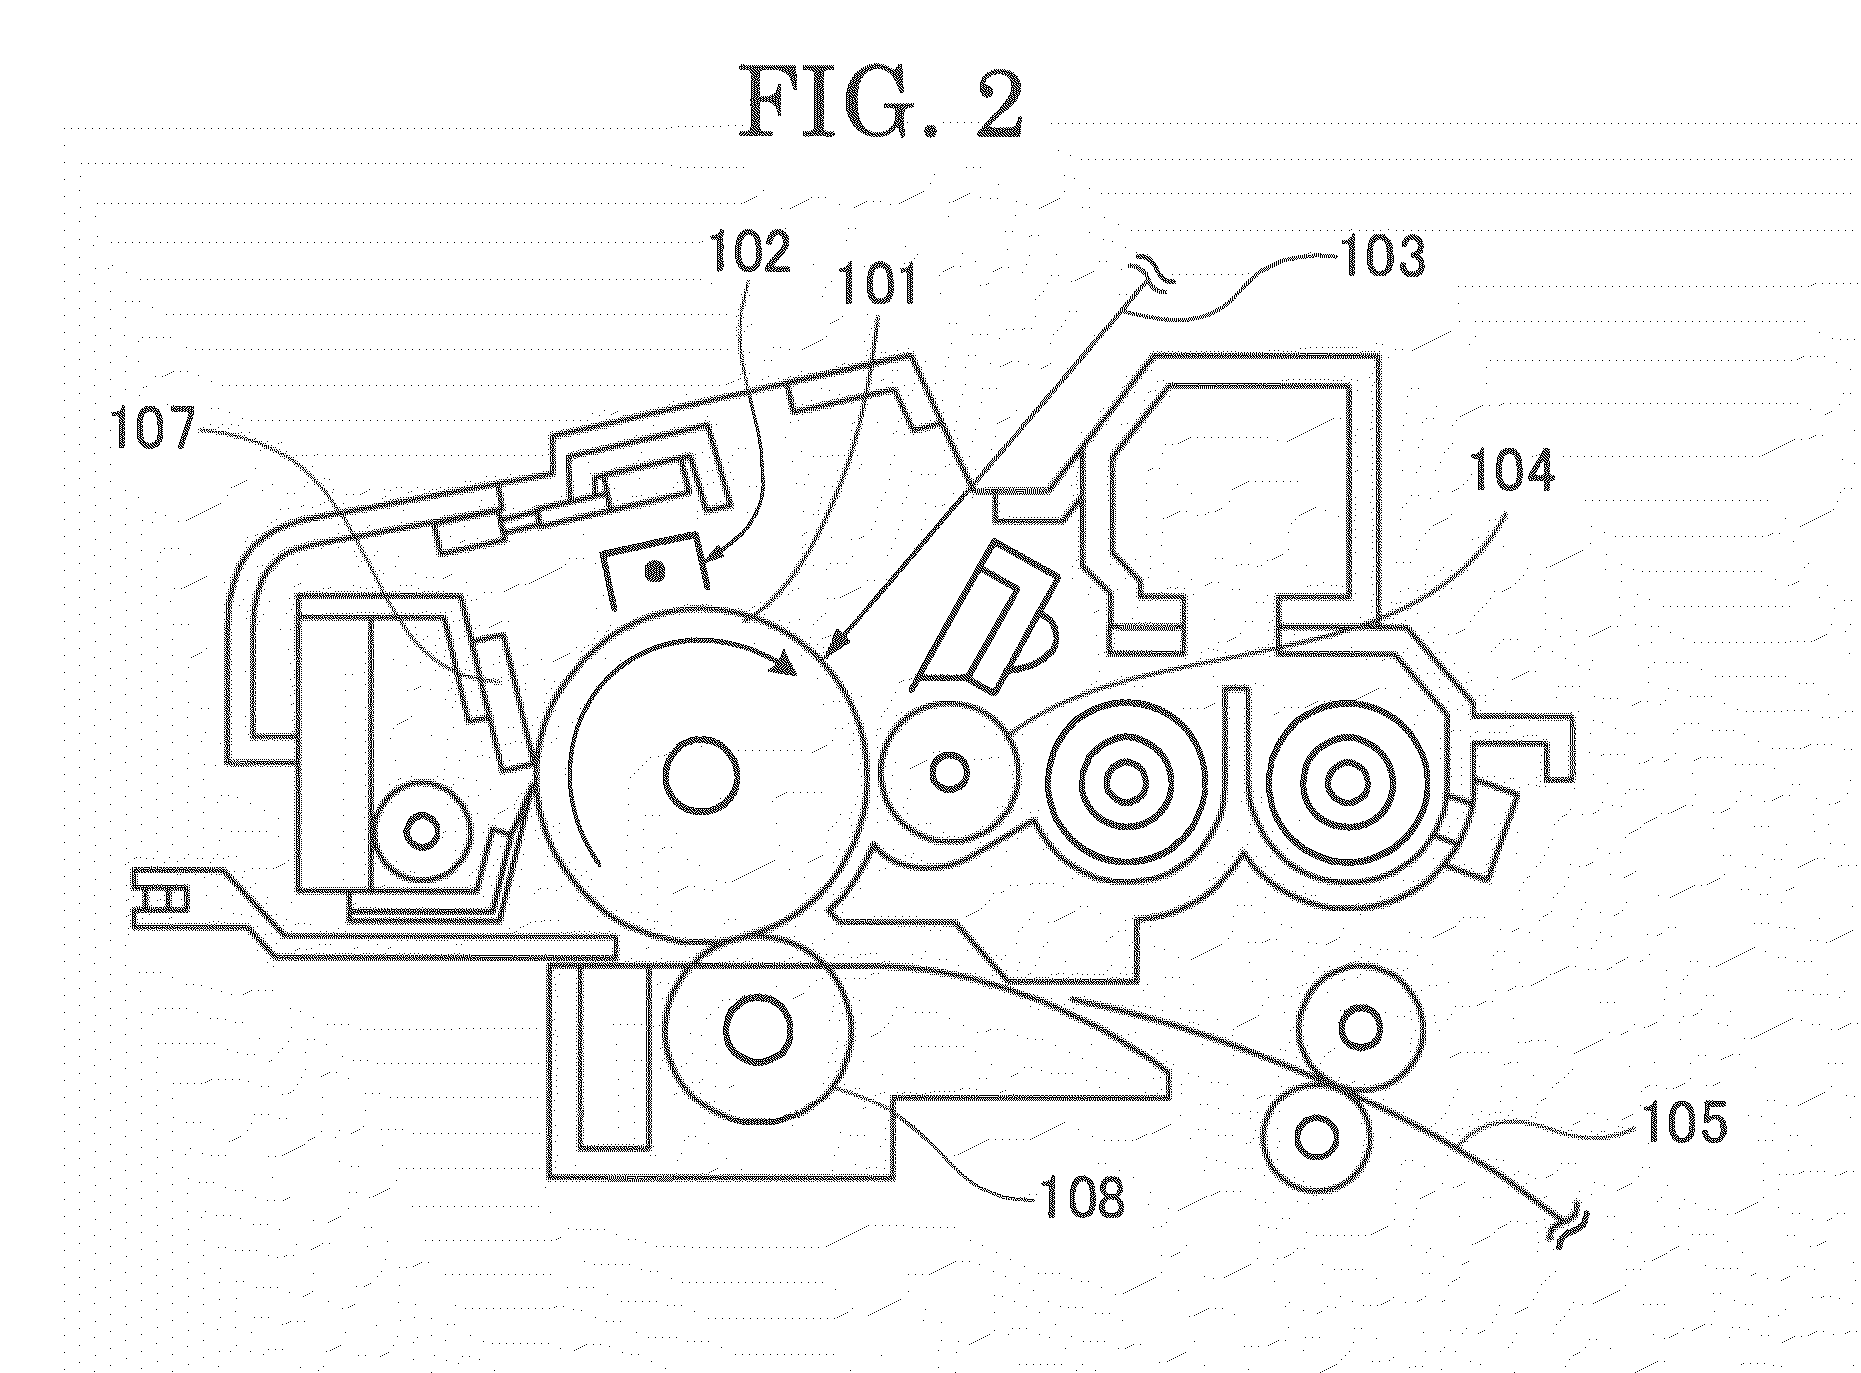 Toner, two component developer, process cartridge and color image forming apparatus